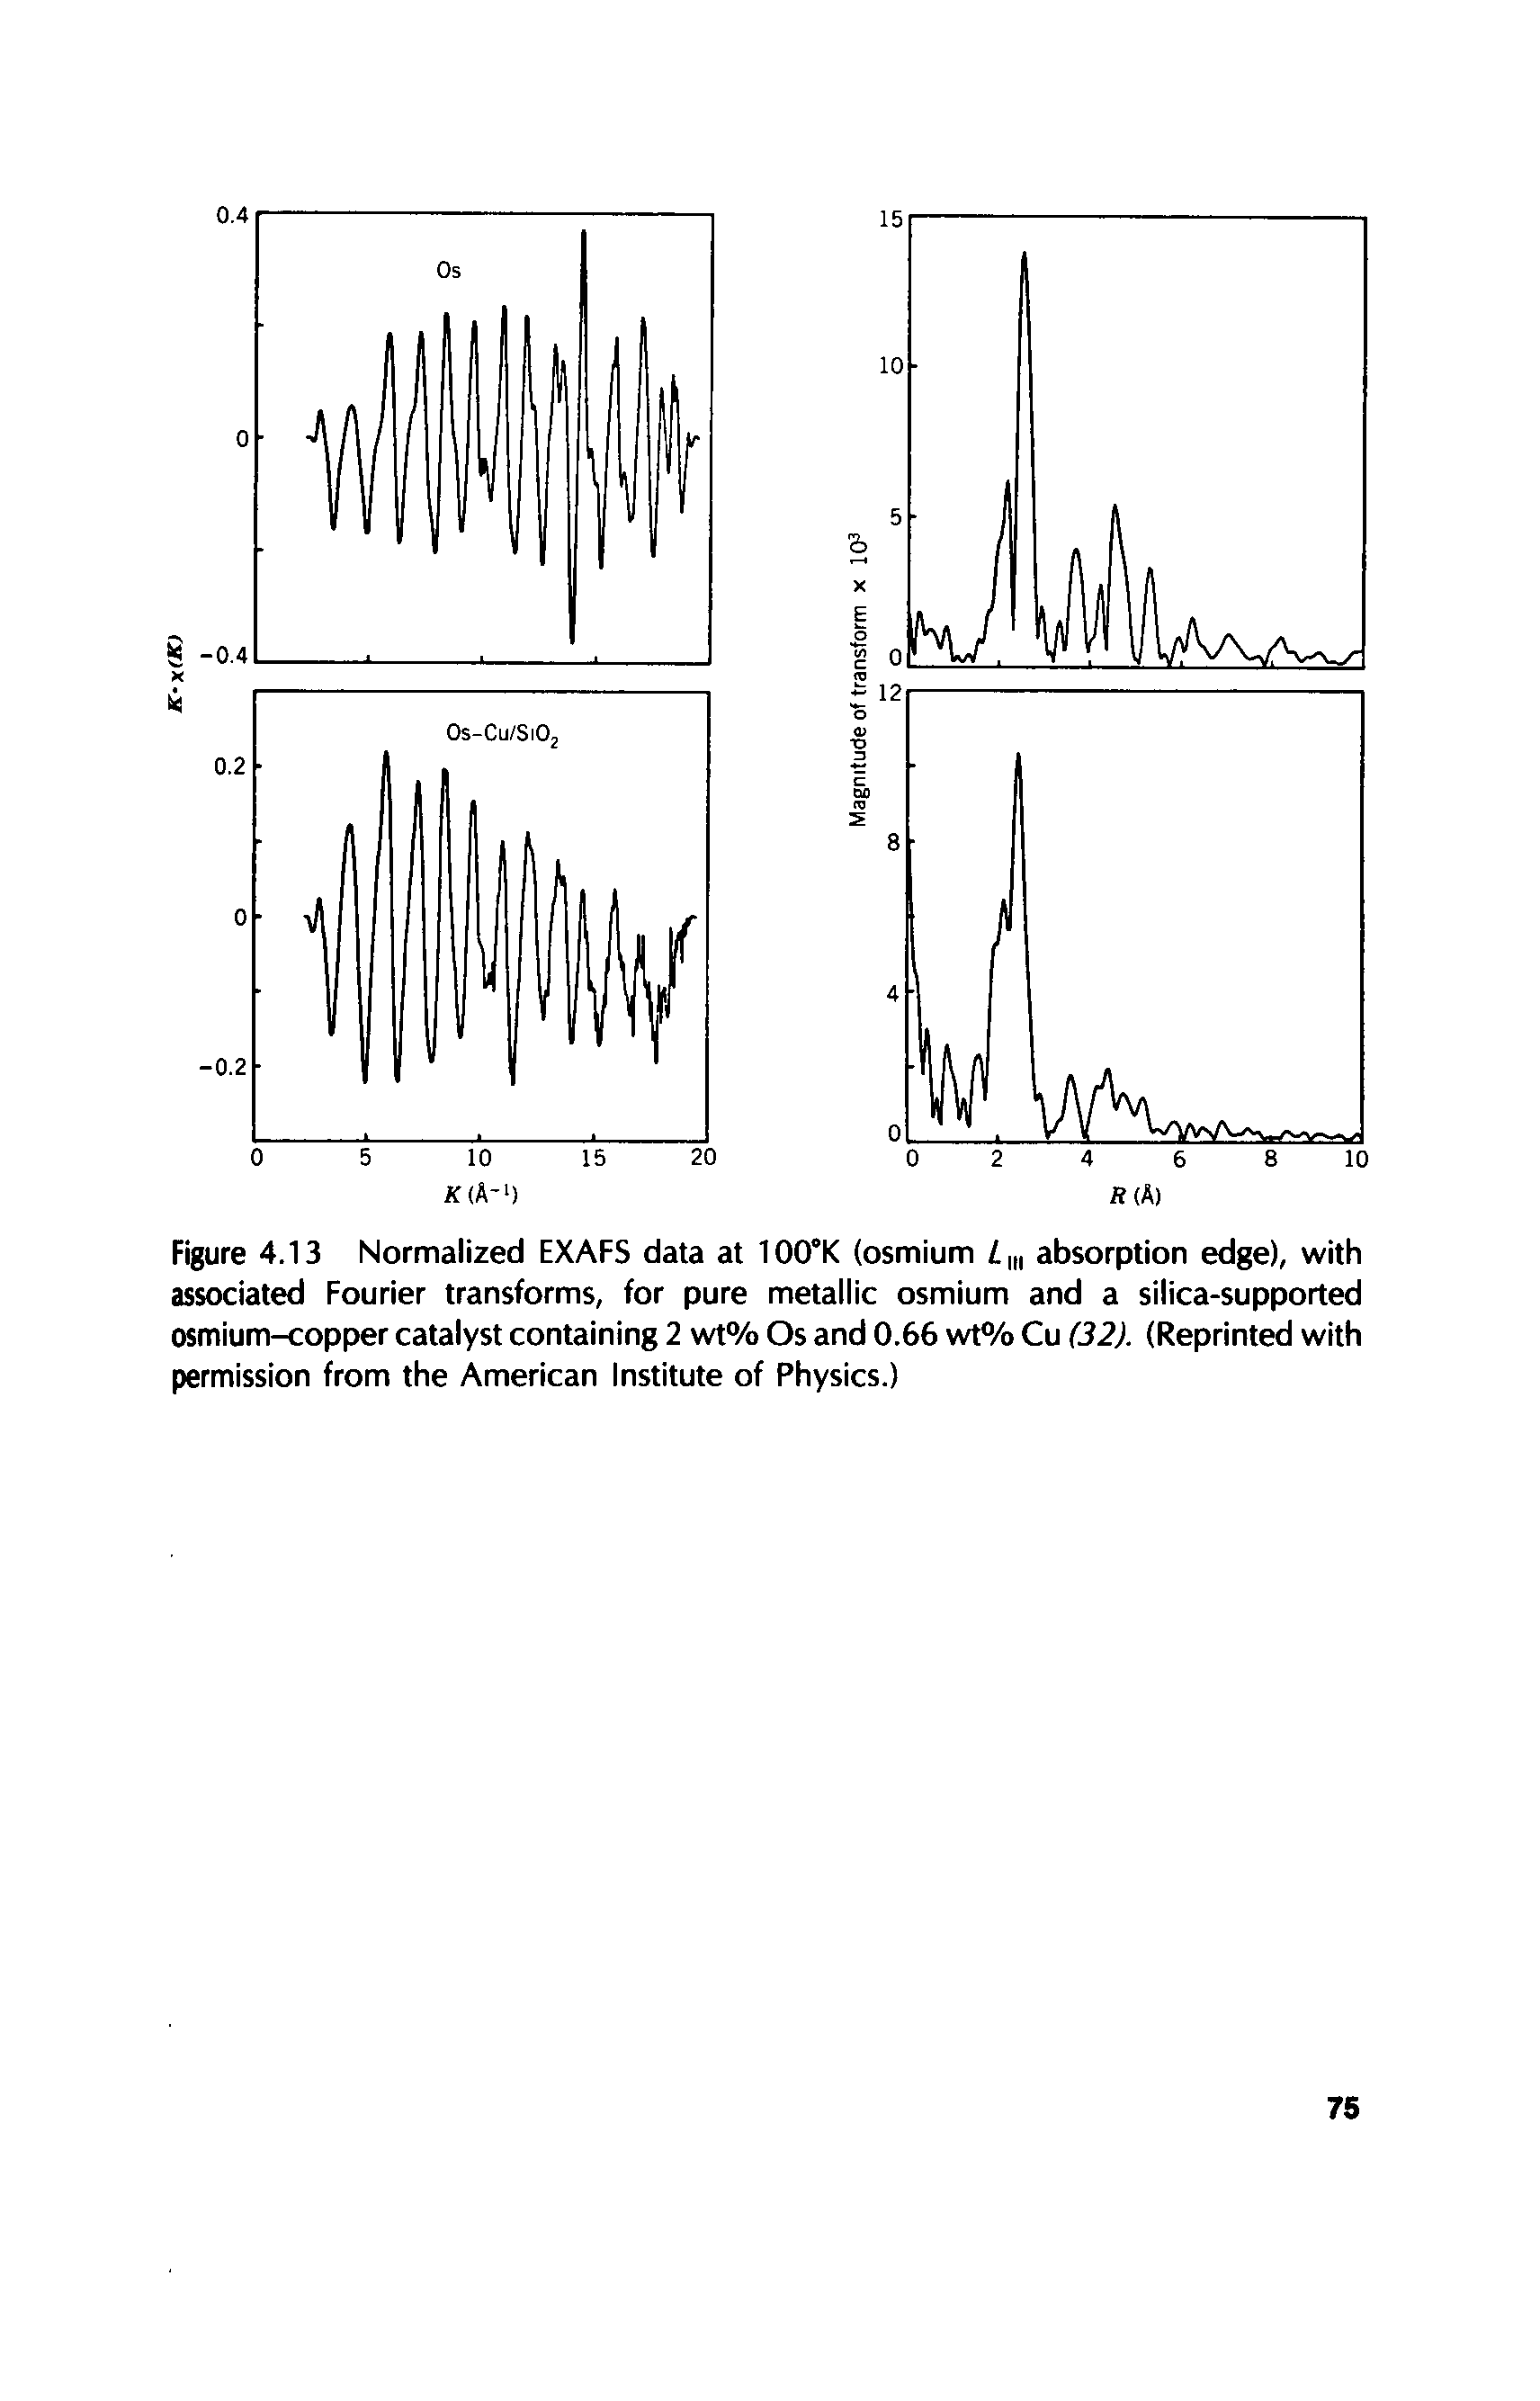 Figure 4.13 Normalized EXAFS data at 100°K (osmium Lm absorption edge), with associated Fourier transforms, for pure metallic osmium and a silica-supported osmium-copper catalyst containing 2 wt% Os and 0.66 wt% Cu (32). (Reprinted with permission from the American Institute of Physics.)...